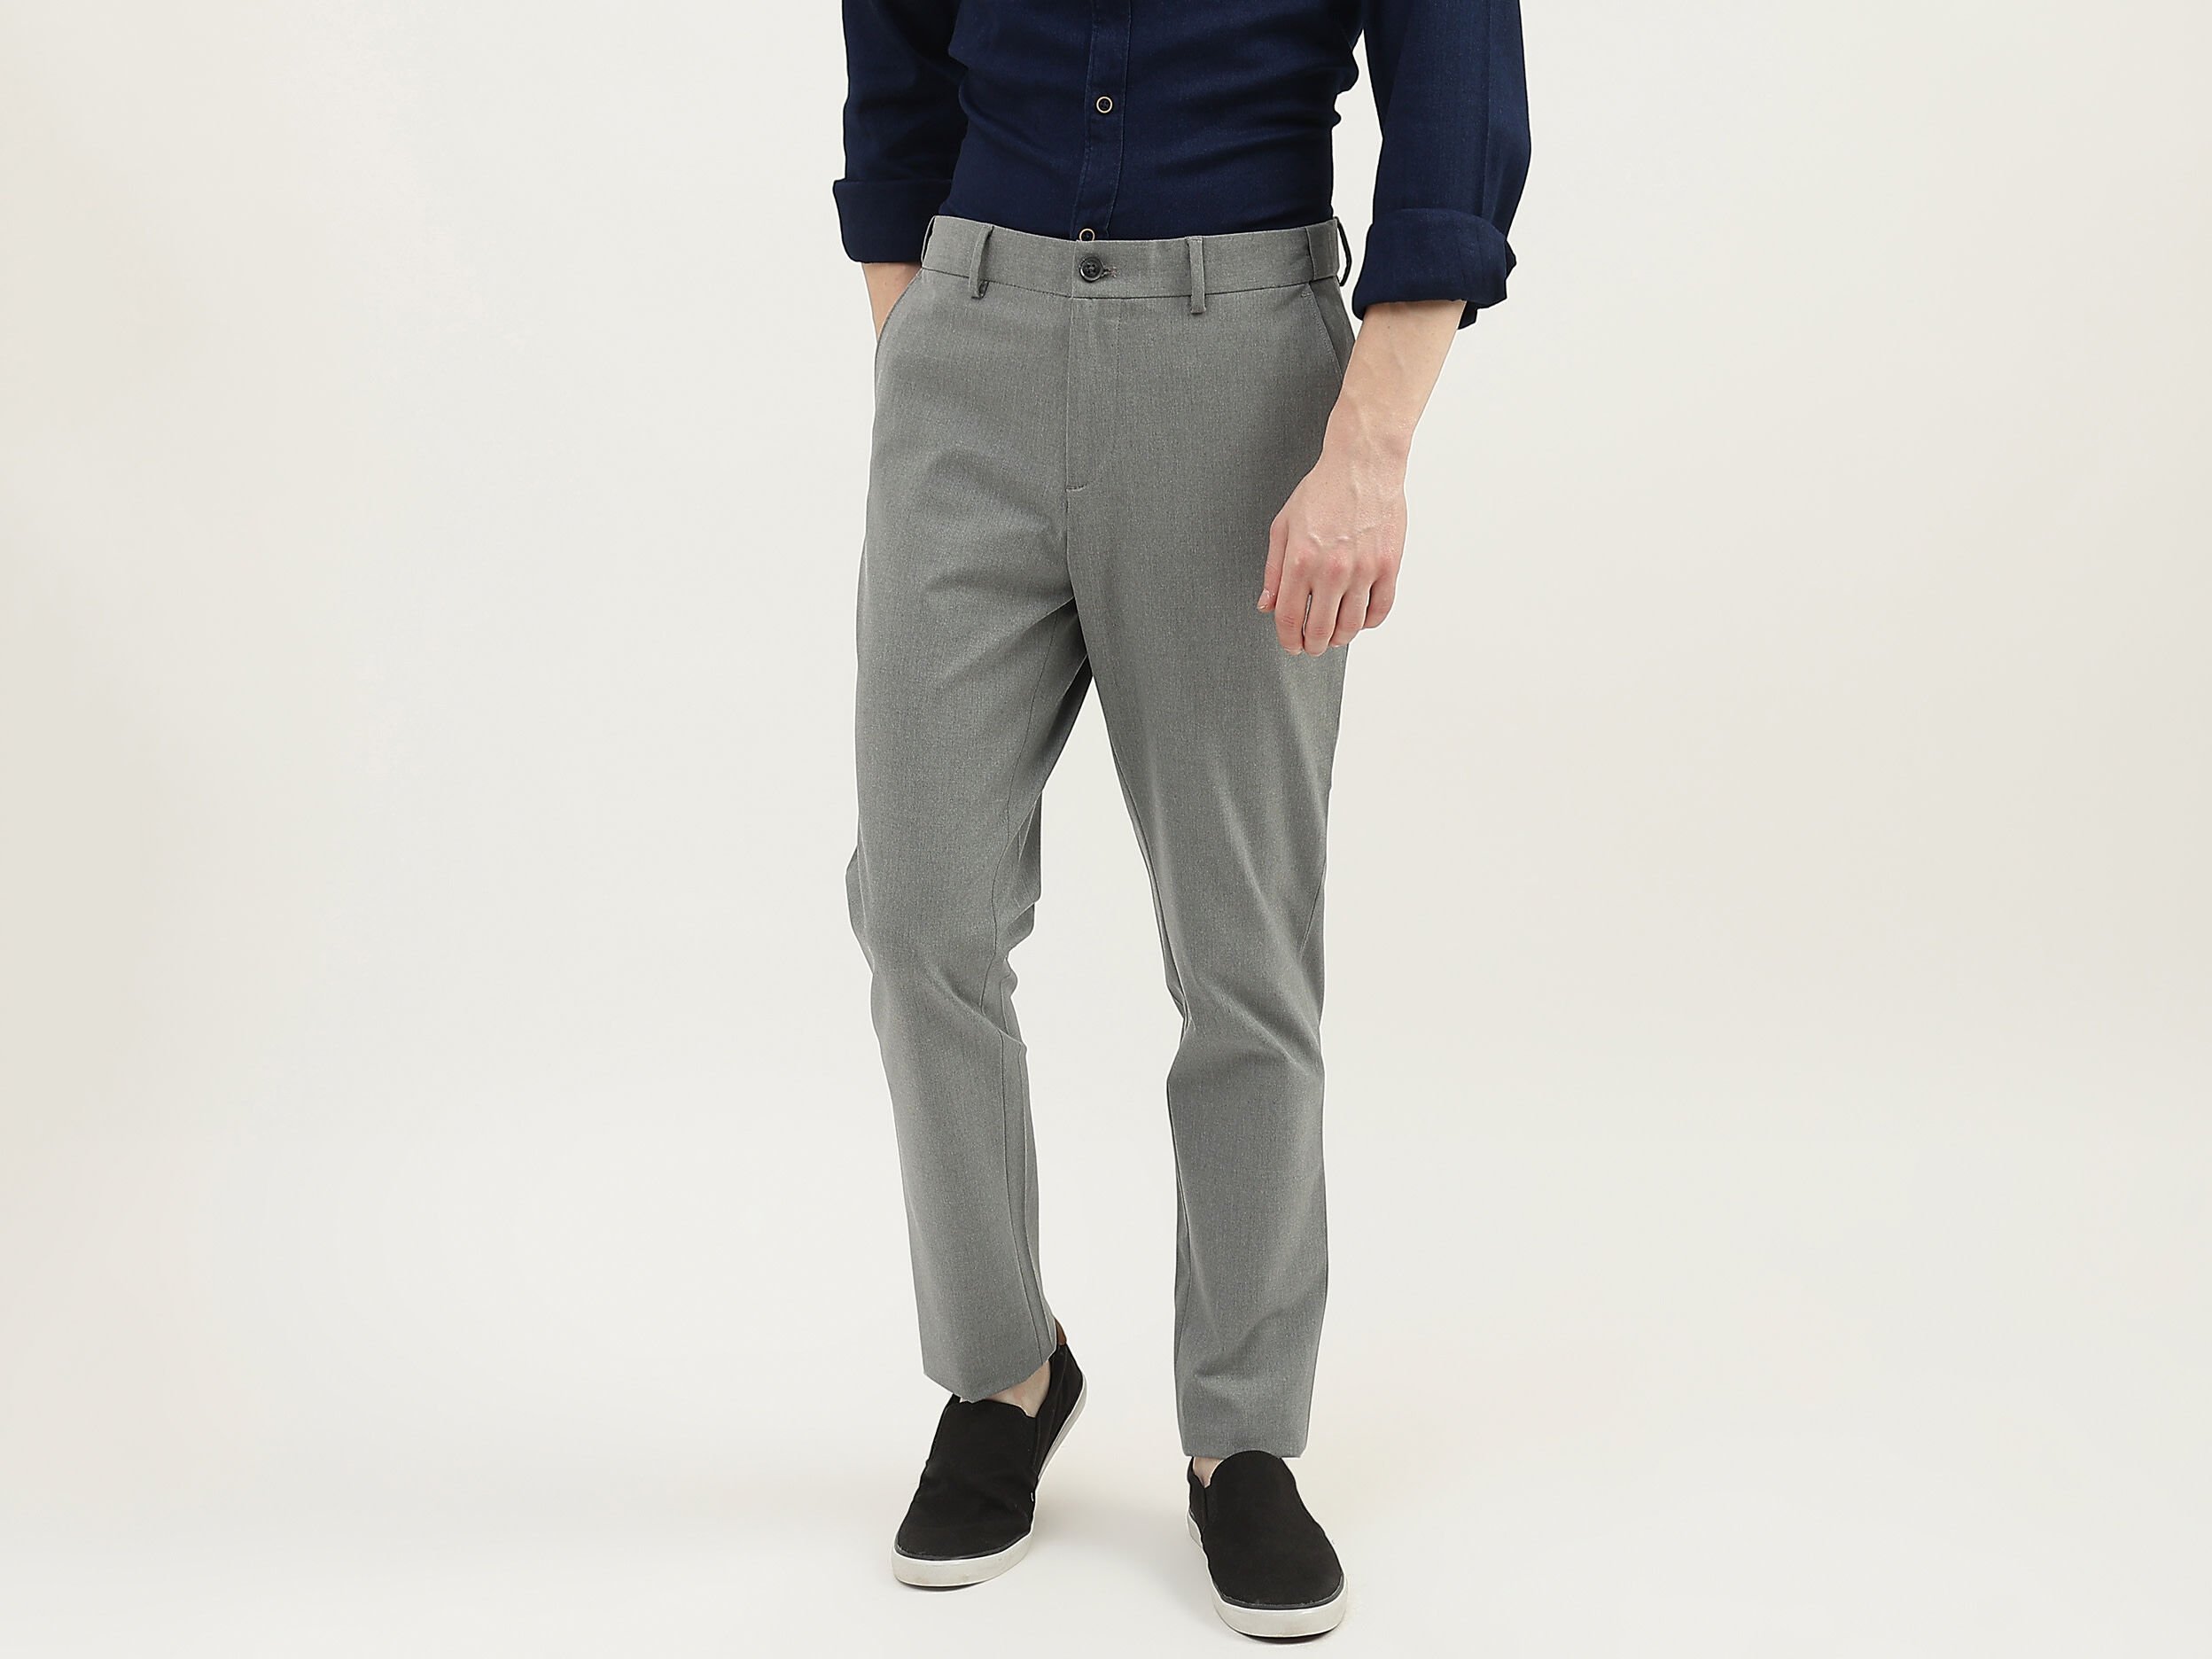 Buy United Colors of Benetton Wine Flat Front Trousers from top Brands at  Best Prices Online in India  Tata CLiQ